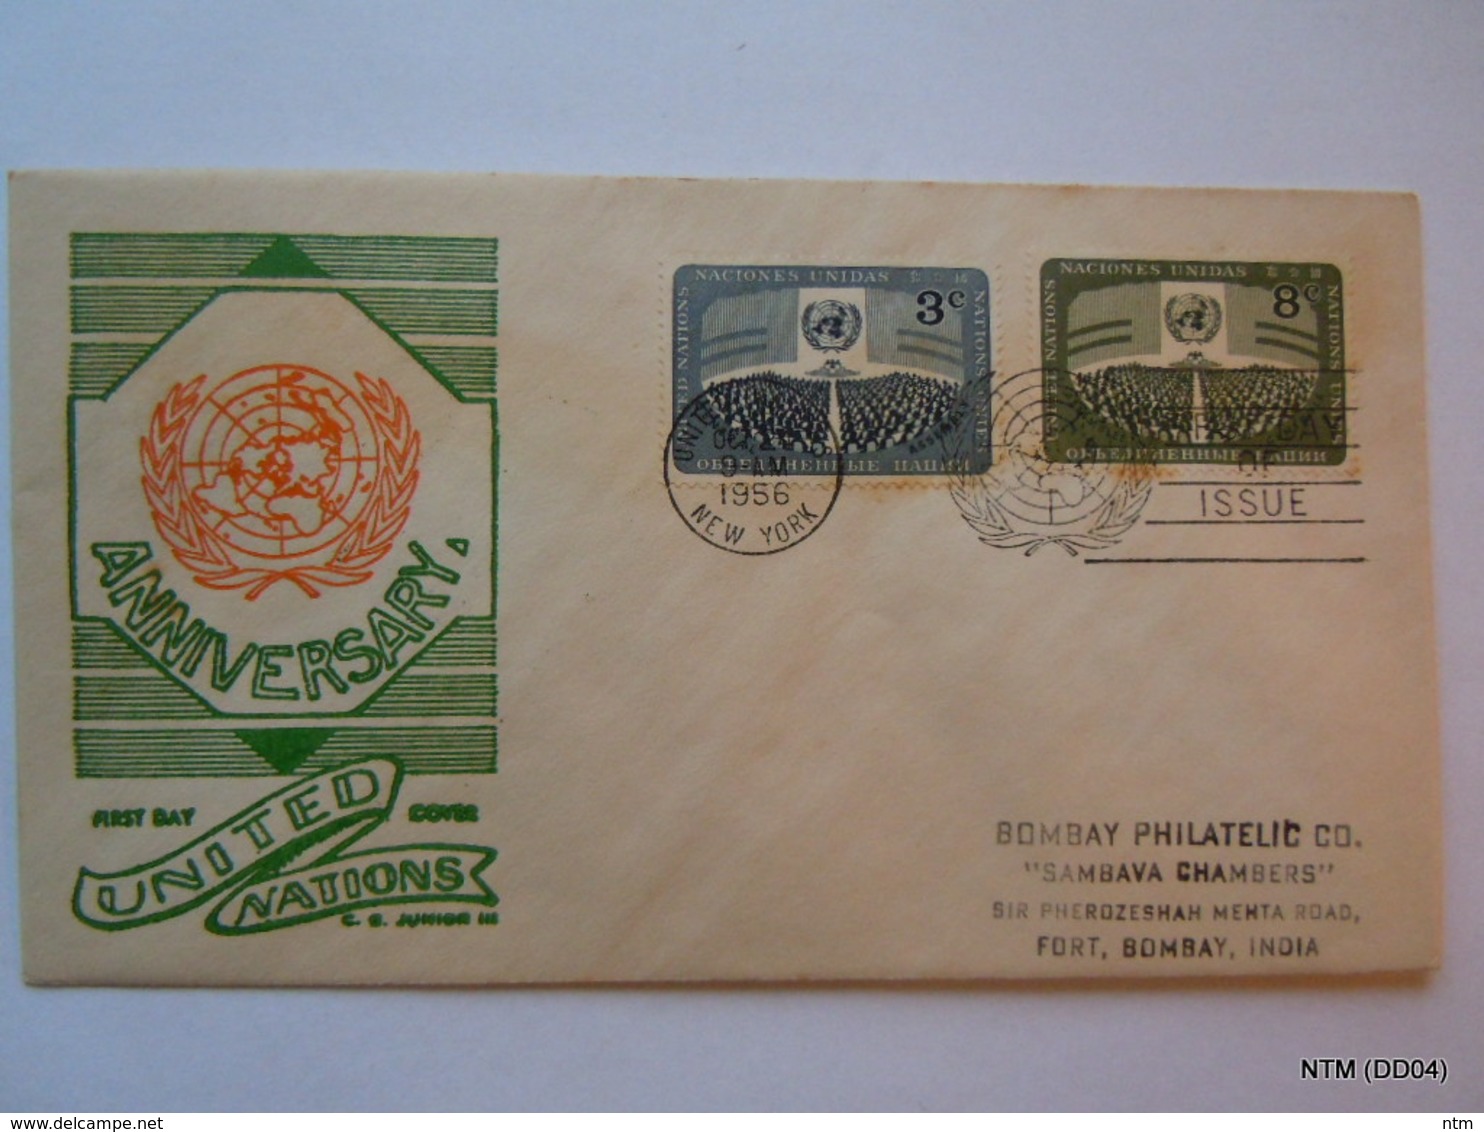 UNITED NATIONS - NATIONS UNIS FDC 1956 U.N. Day Anniversary. SG 45-46, Used First Day Cover Sent To India. - Briefe U. Dokumente